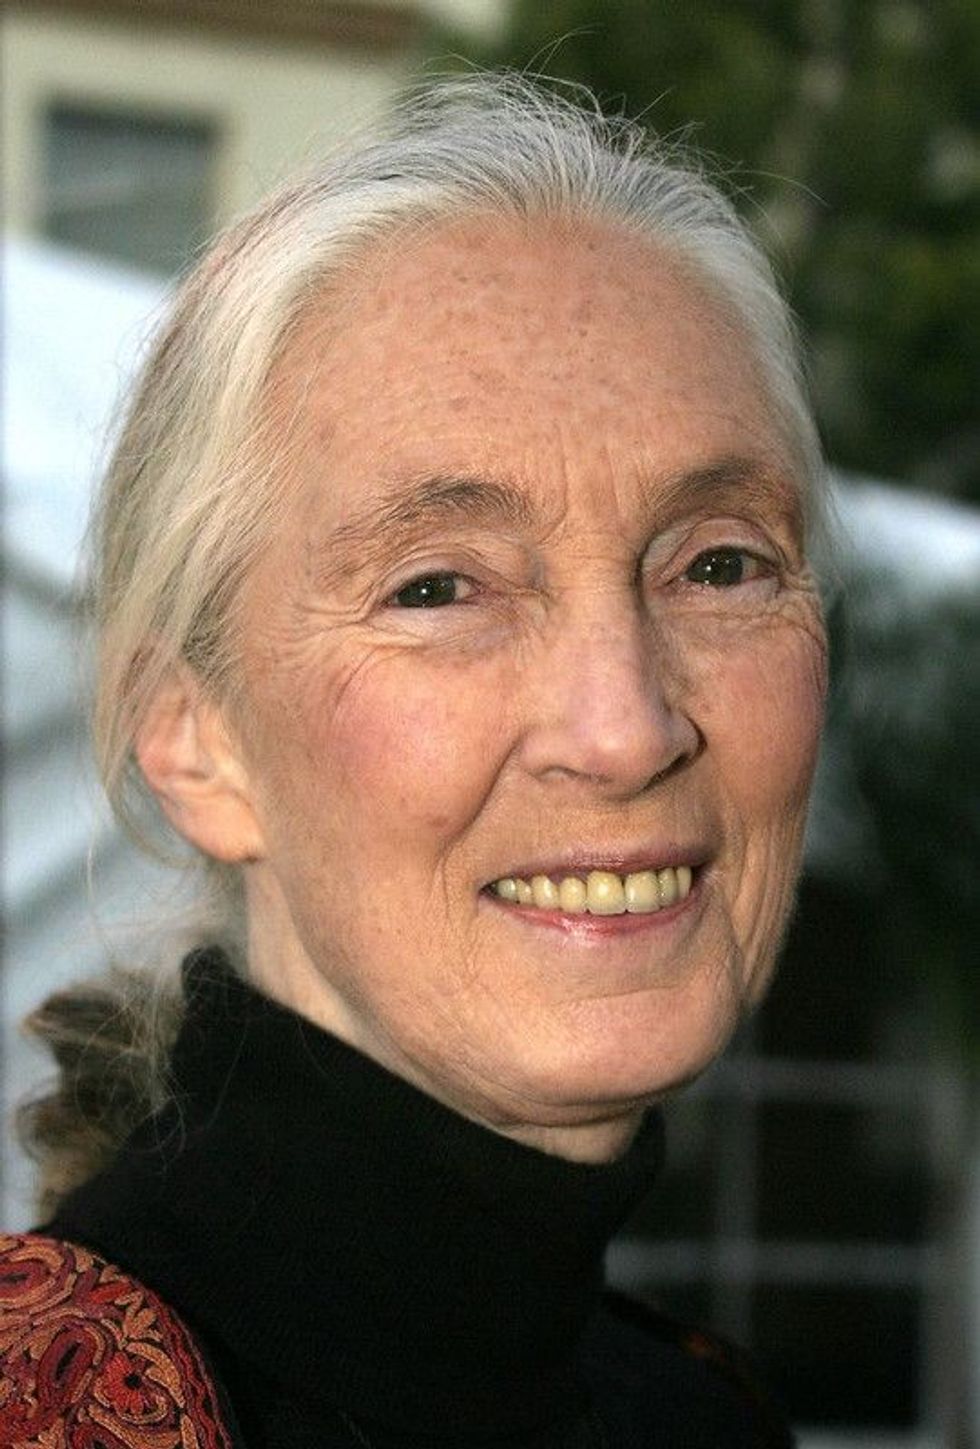 Jane Goodall now spends almost all of her time advocating for chimps, environmental and conservation issues. Continue reading to find out everything about this achiever.